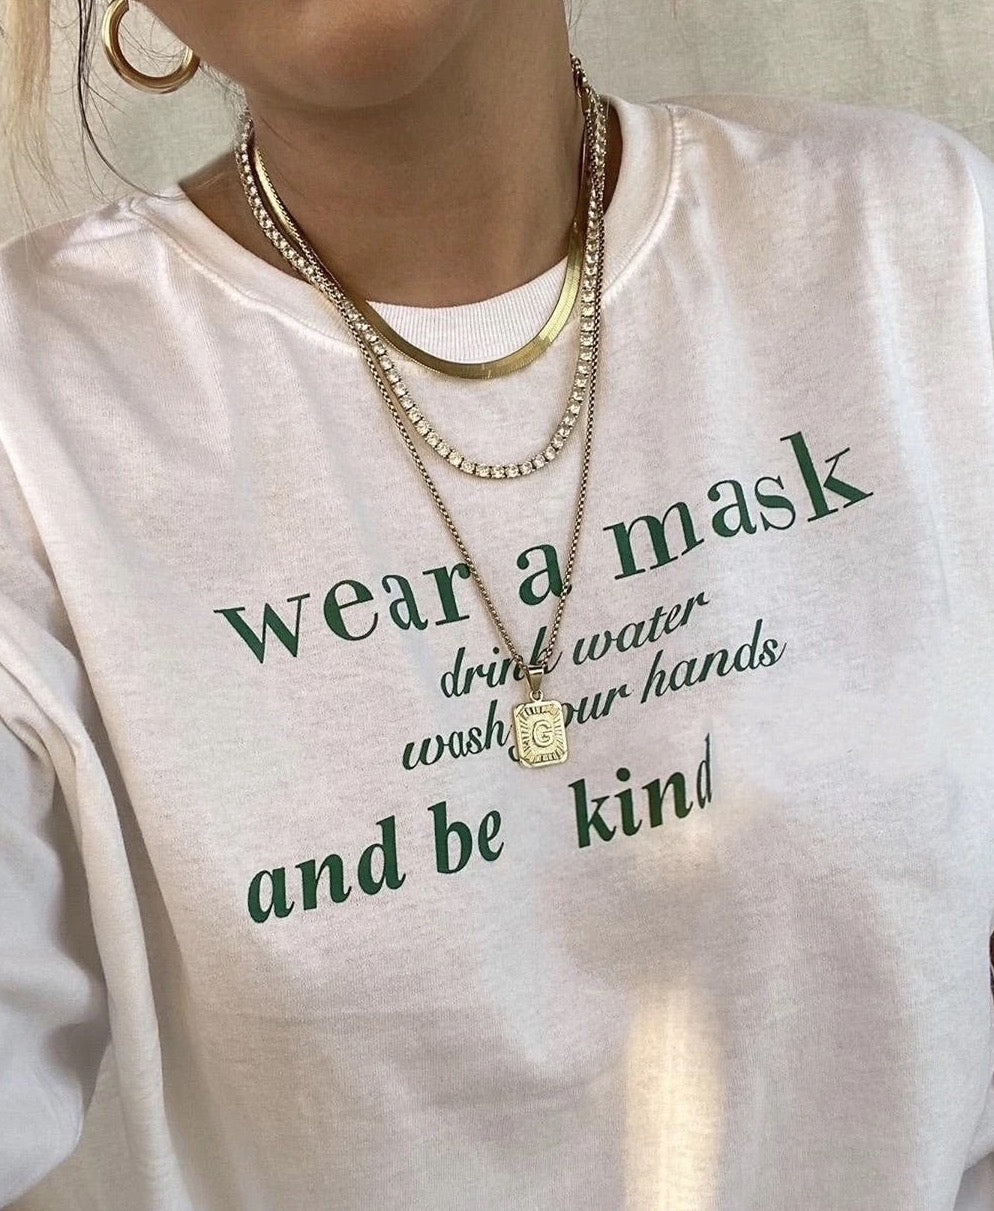 WEAR A MASK AND BE KIND CREWNECK G RATED